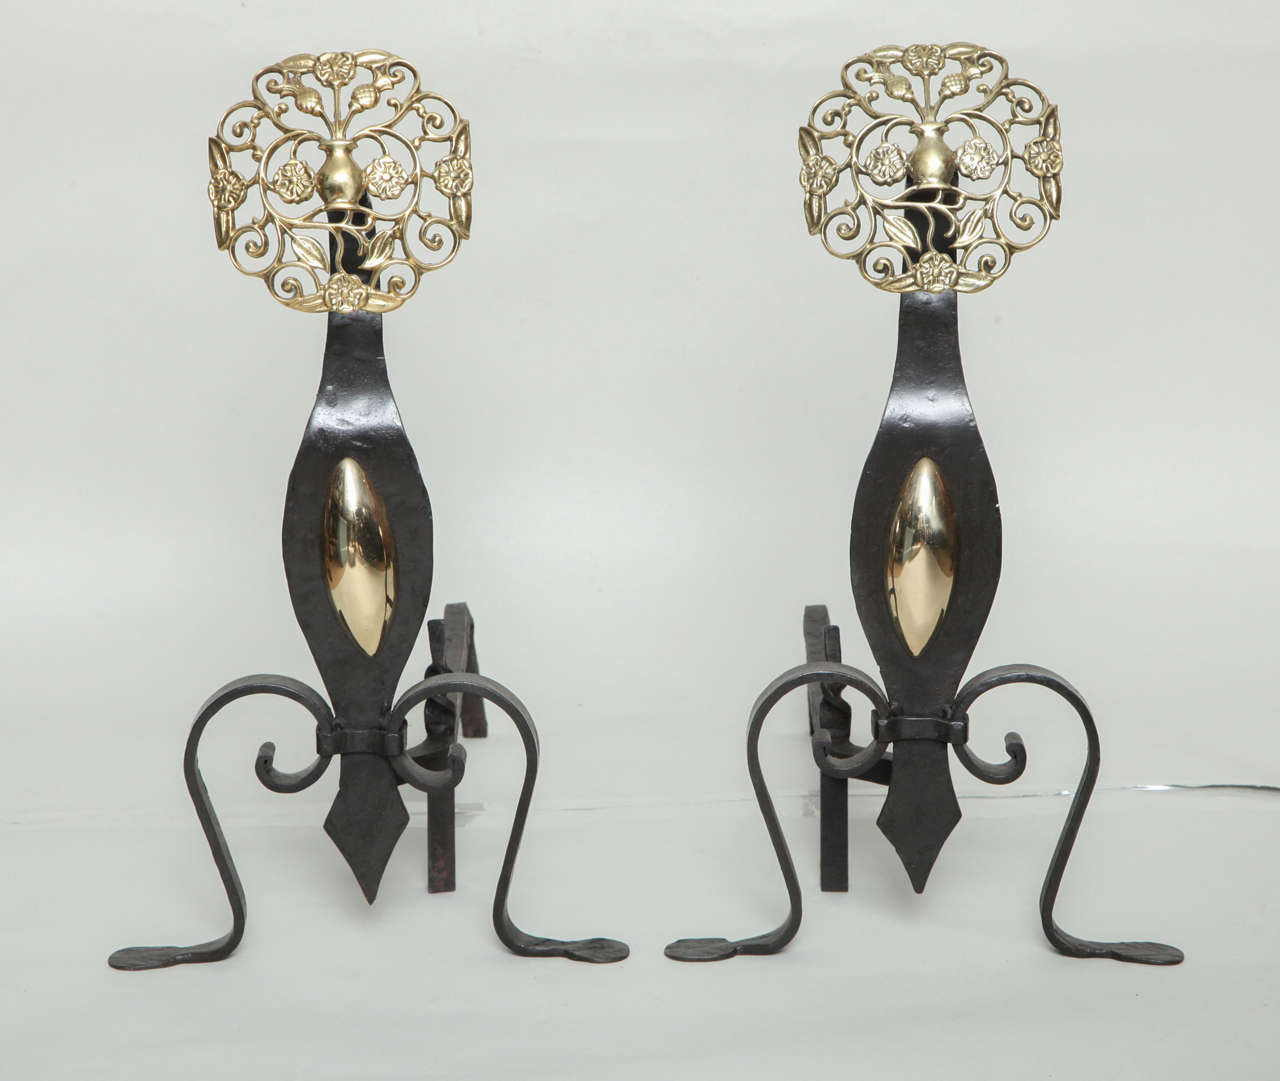 Fine pair of Arts and Crafts period andirons, the filigree brass tops depicting flowering vases, over hand-hammered iron shafts with brass lozenges, standing on scroll feet.